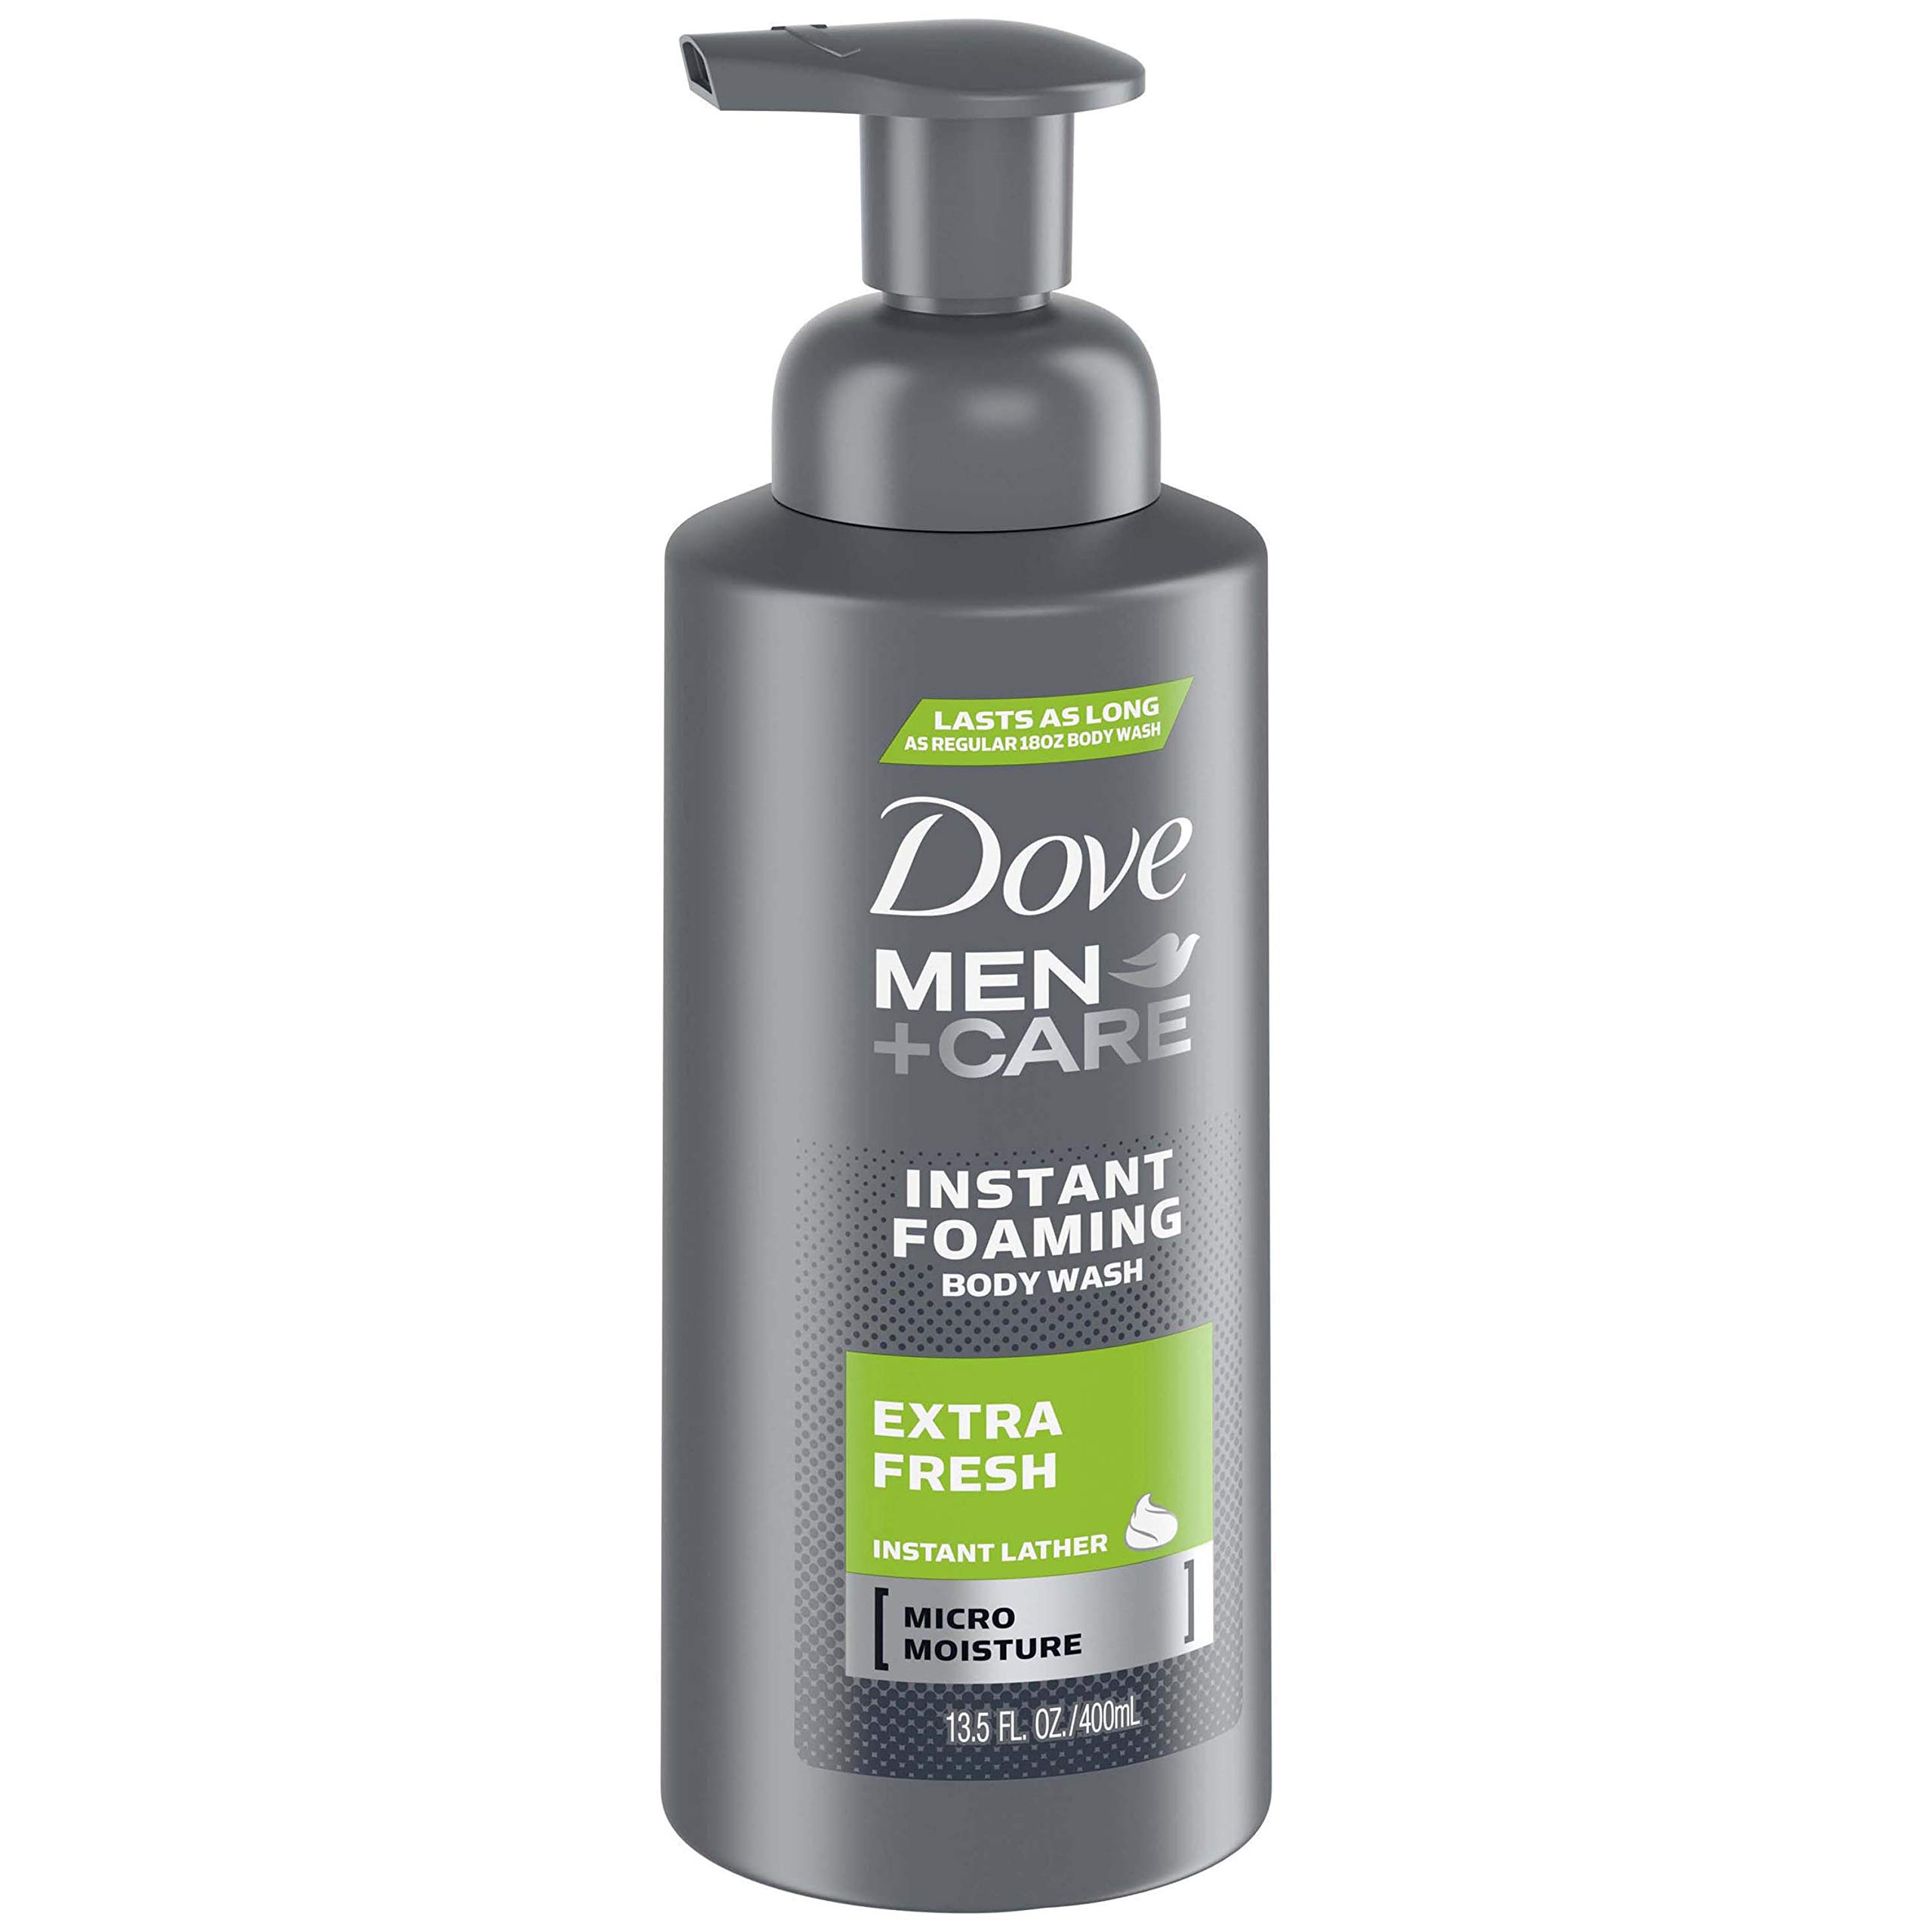 Dove Men+Care Foaming Body Wash to Hydrate Skin Extra Fresh Effectively Washes Away Bacteria While Nourishing Your Skin 13.5 oz